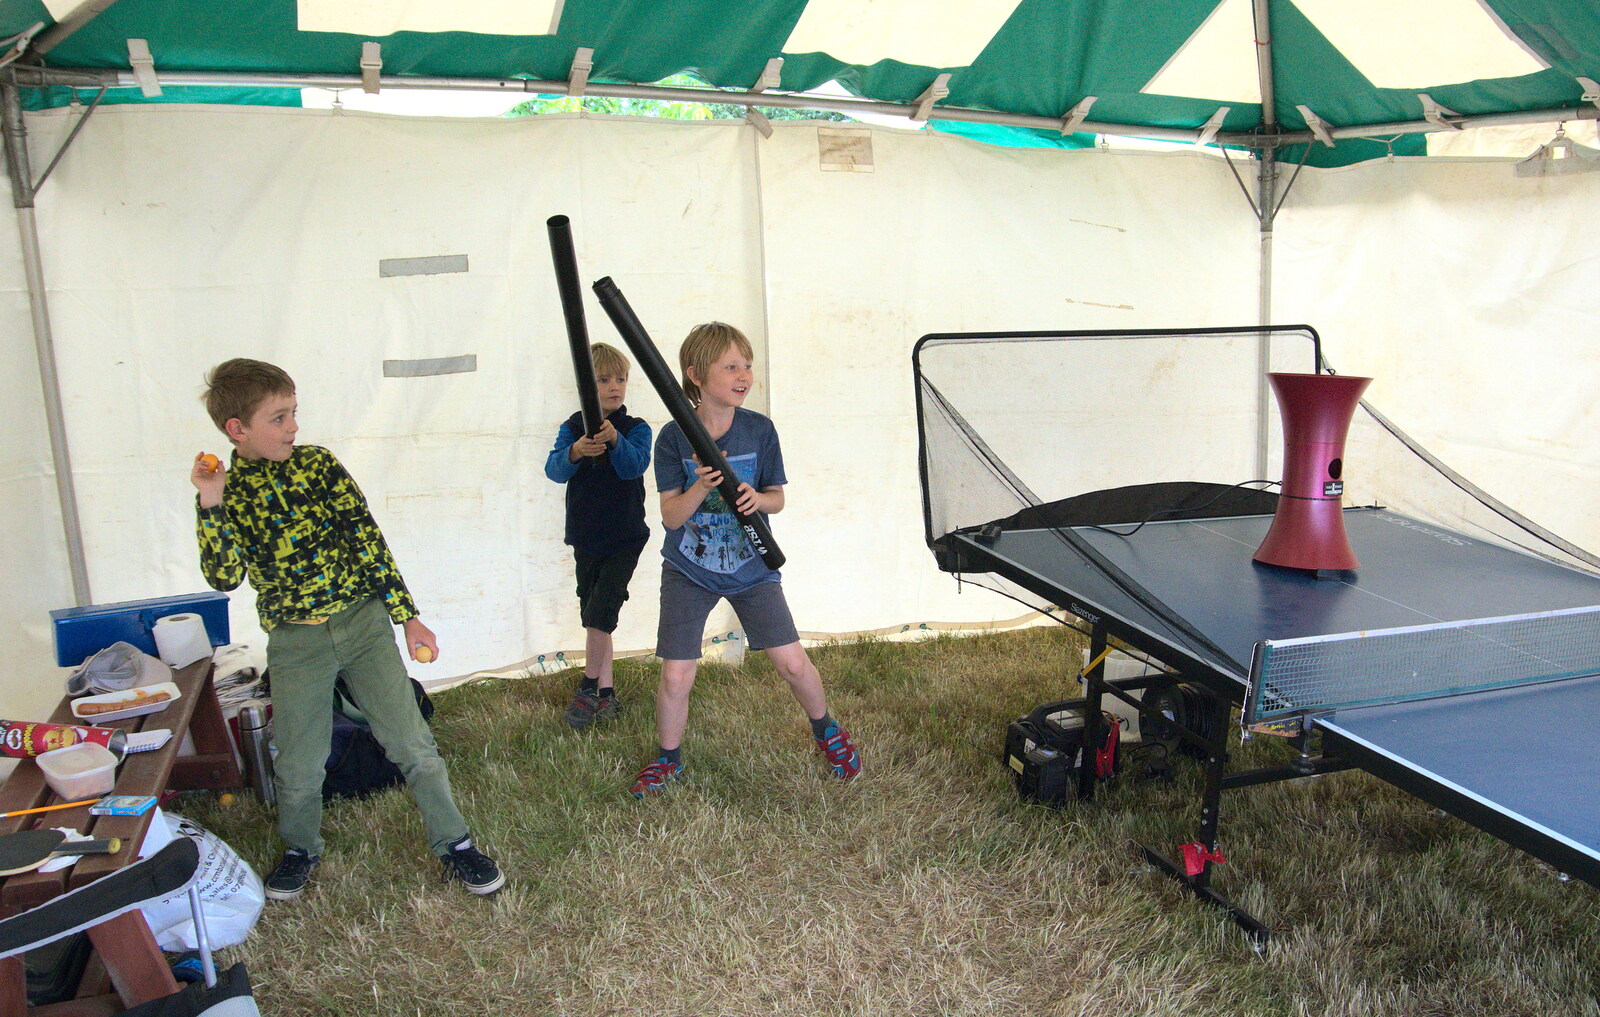 The boys get a bit excited in the ping-pong tent from The Formerly-Known-As-The-Eye-Show, Palgrave, Suffolk - 17th June 2018